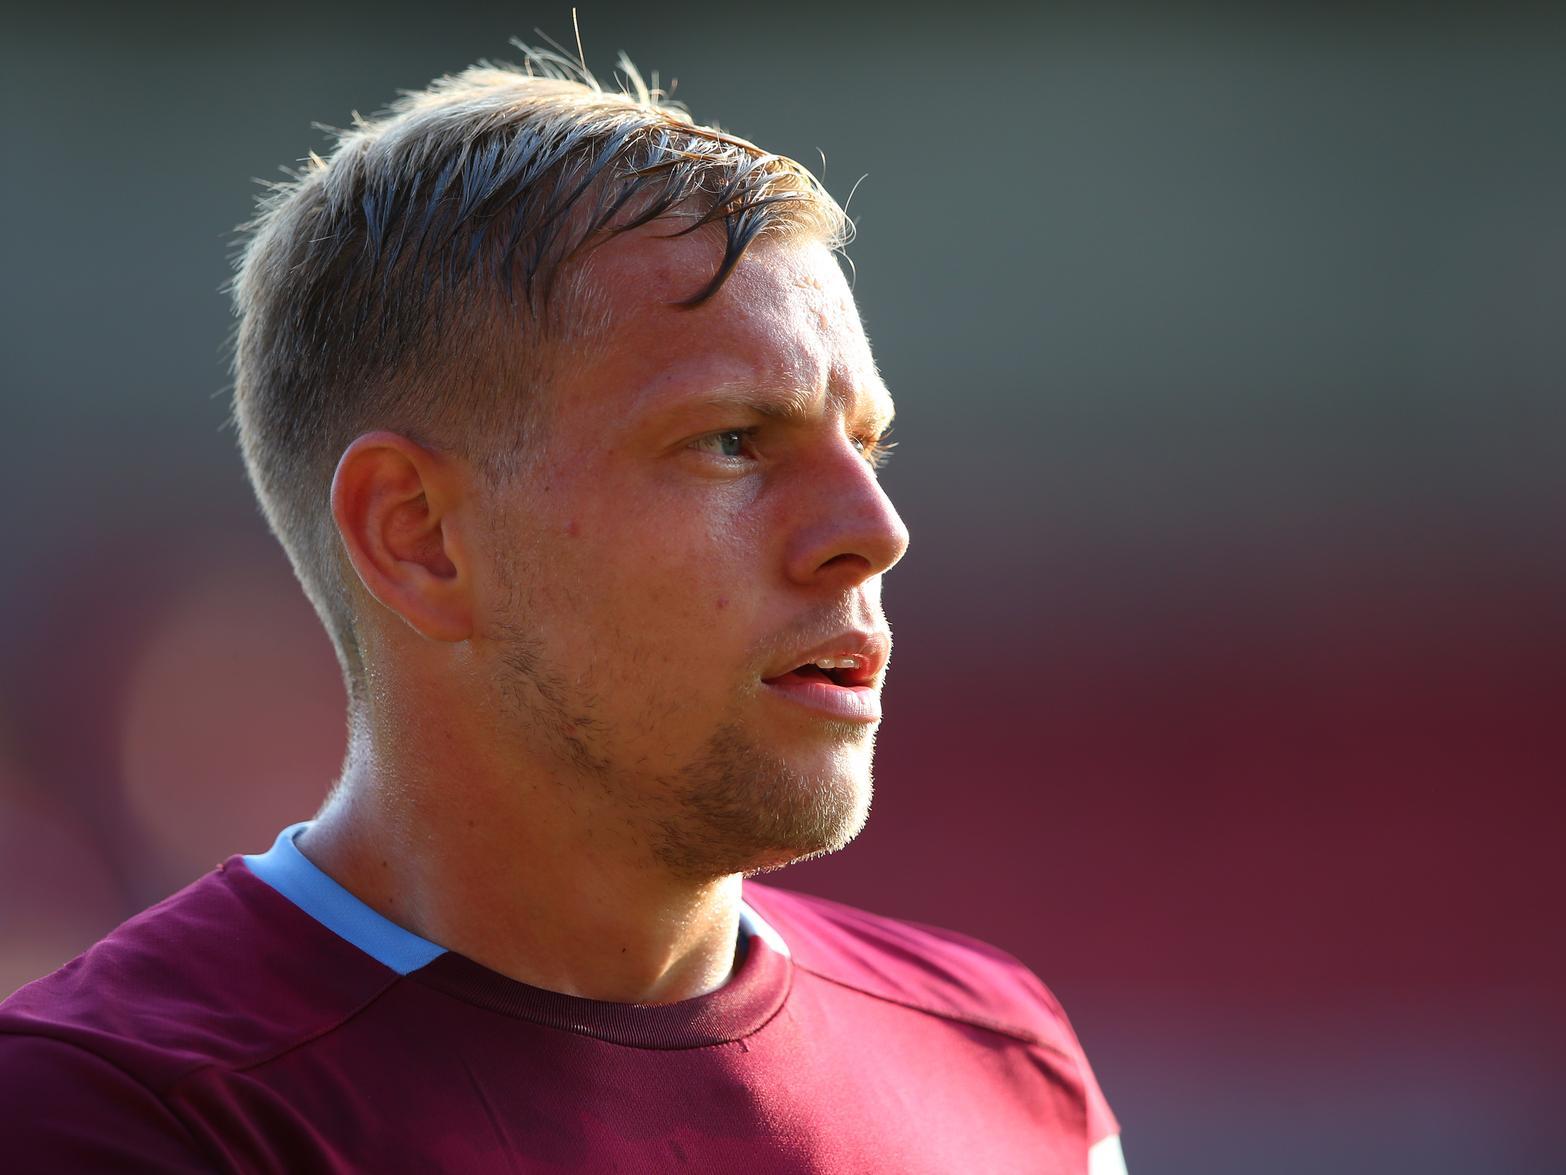 Vydra was famously spotted in Leeds last summer, yet ultimately ended up at Burnley. He isn't getting very much time on the pitch though, so would the Whites look at him again? It's hard to say - the noises coming out of Elland Road seemed to indicate he may have burned a few bridges with his actions.